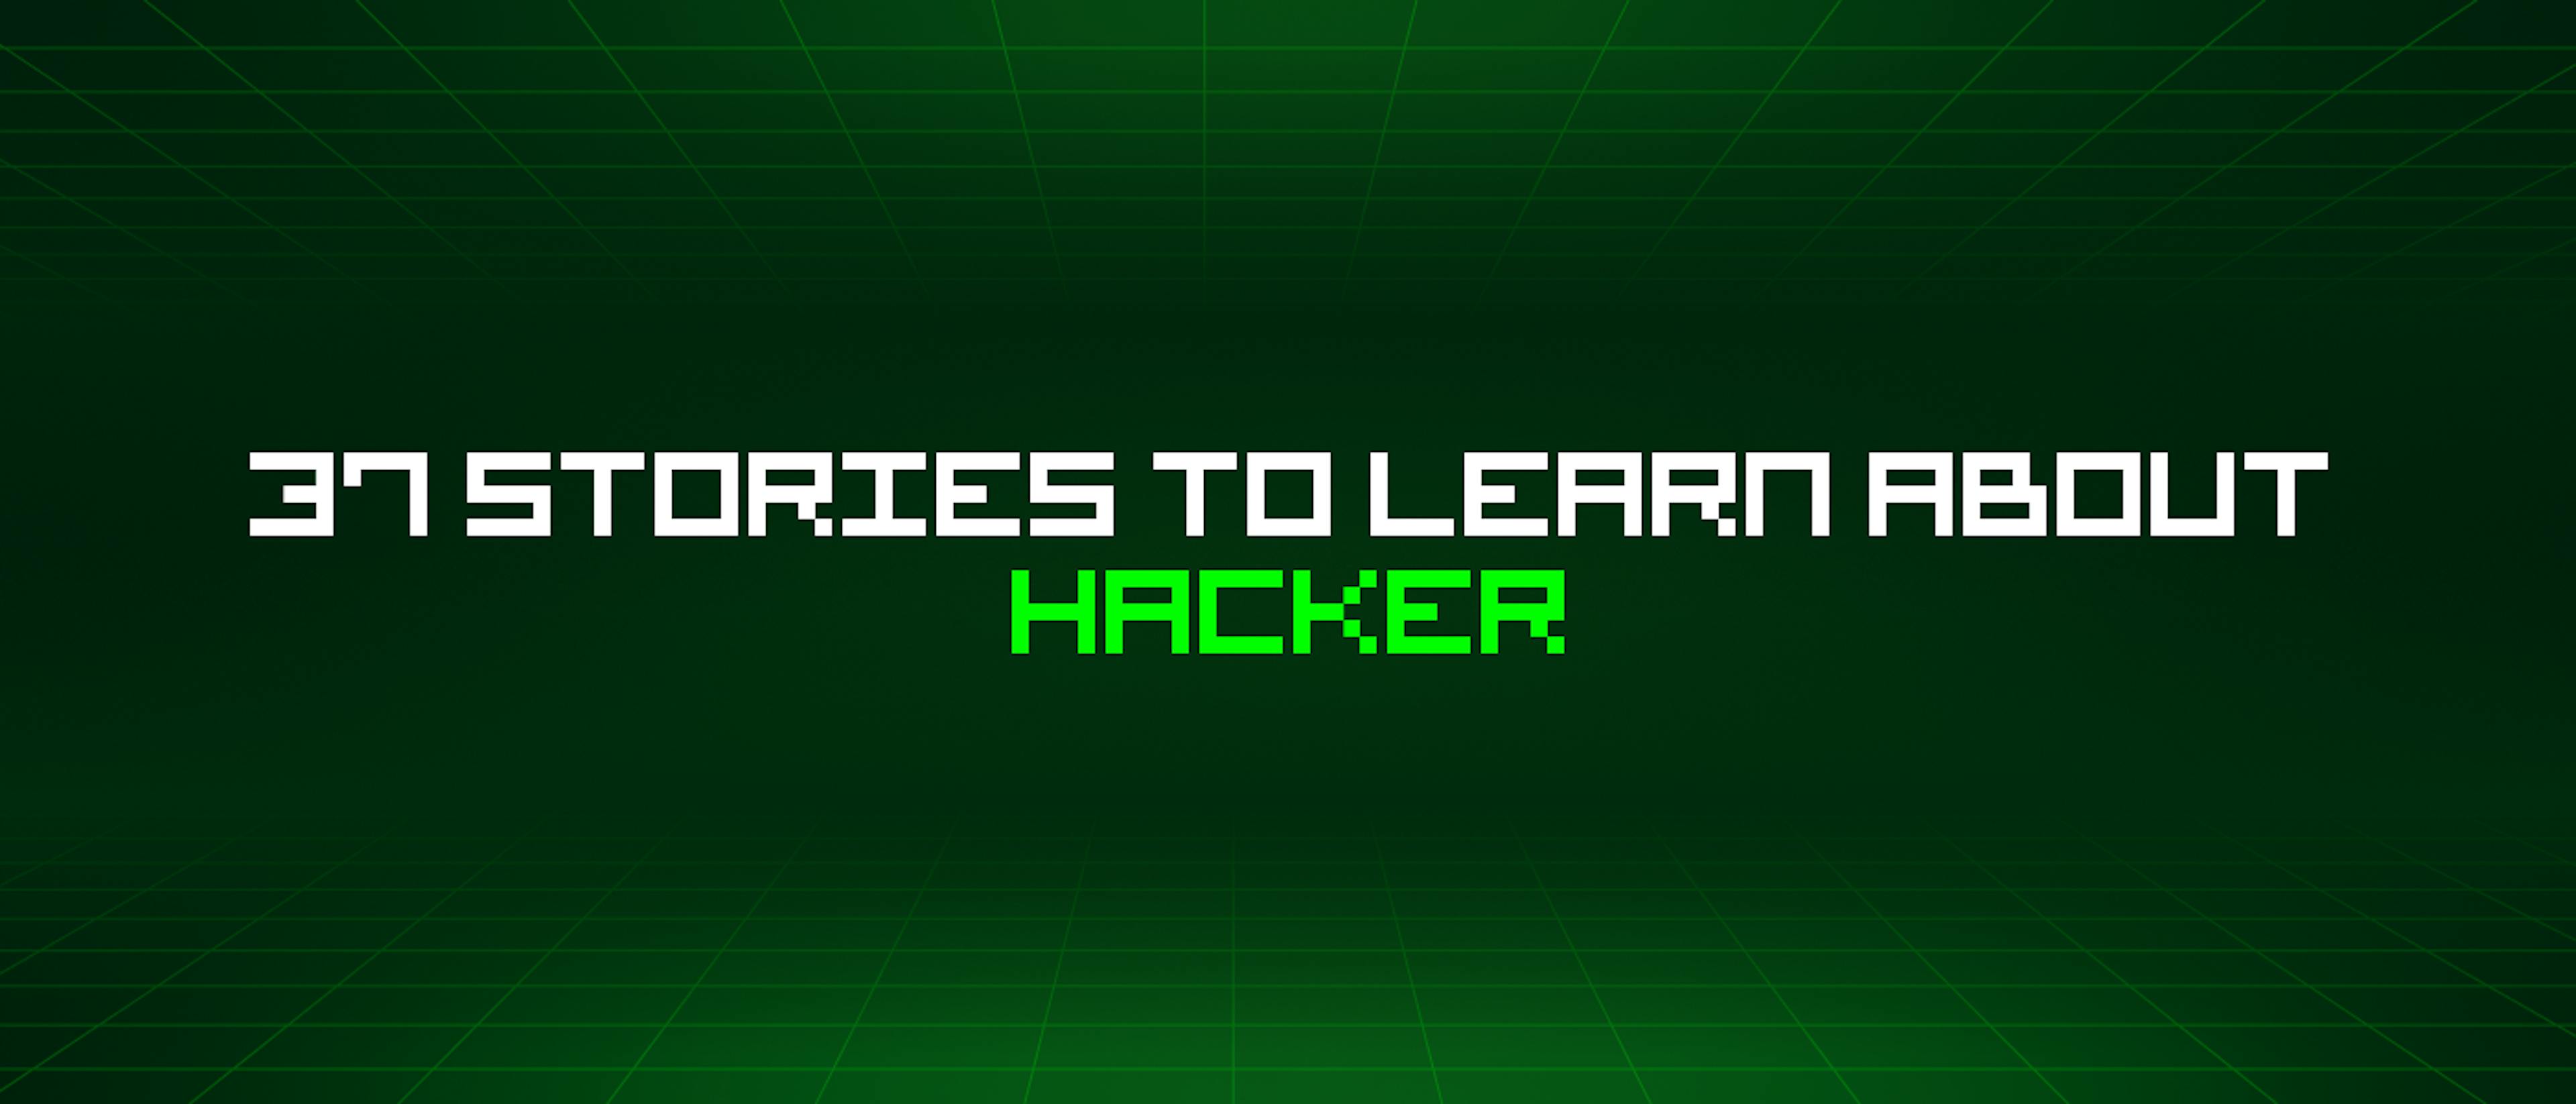 featured image - 37 Stories To Learn How to Become a Hacker